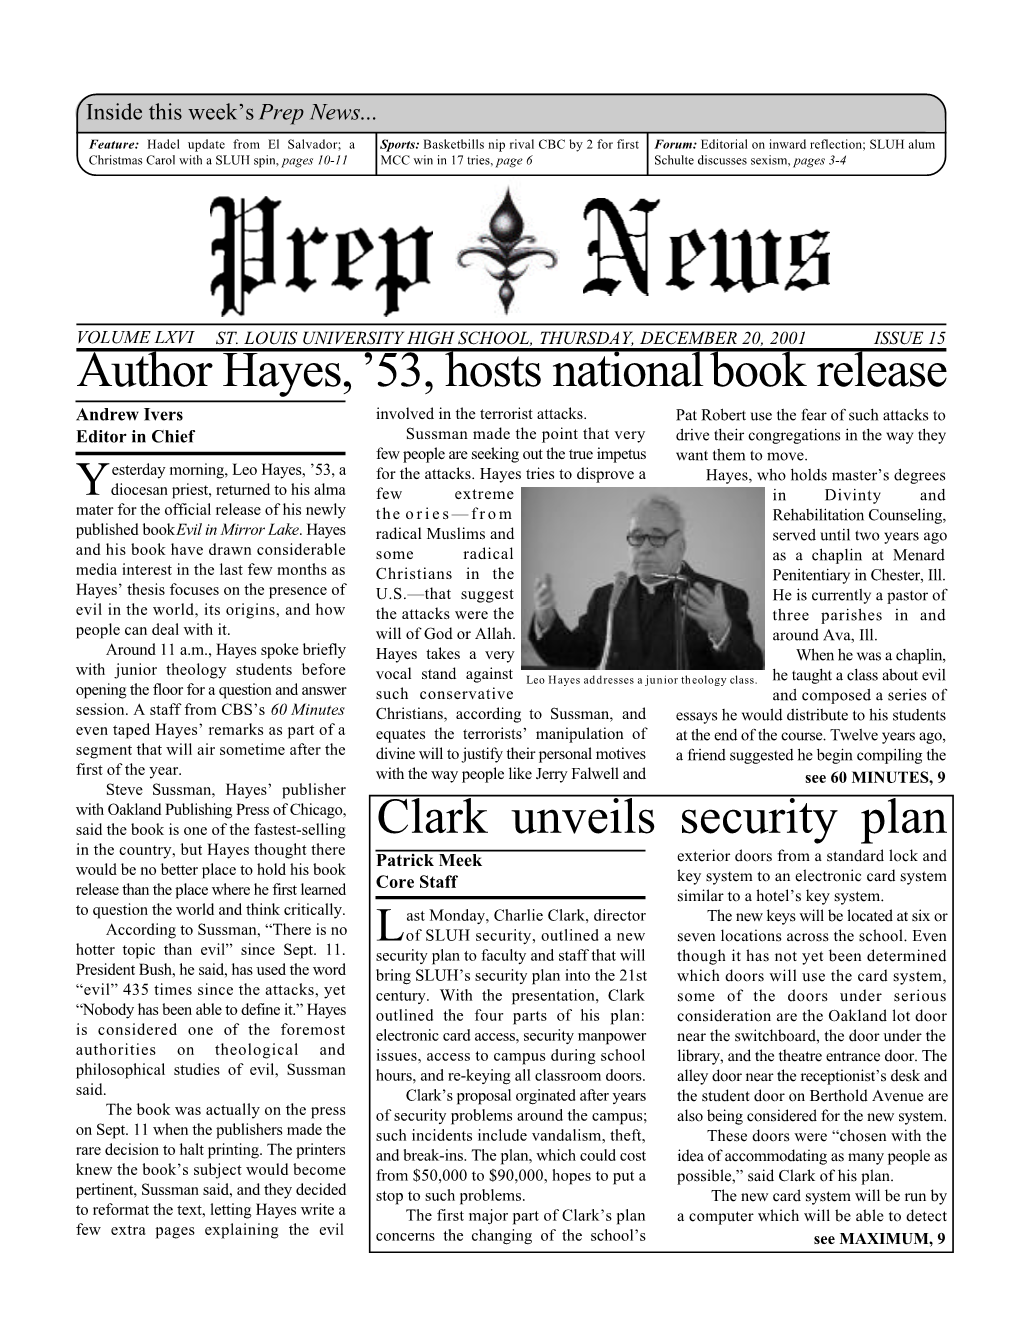 Author Hayes, '53, Hosts National Book Release Clark Unveils Security Plan